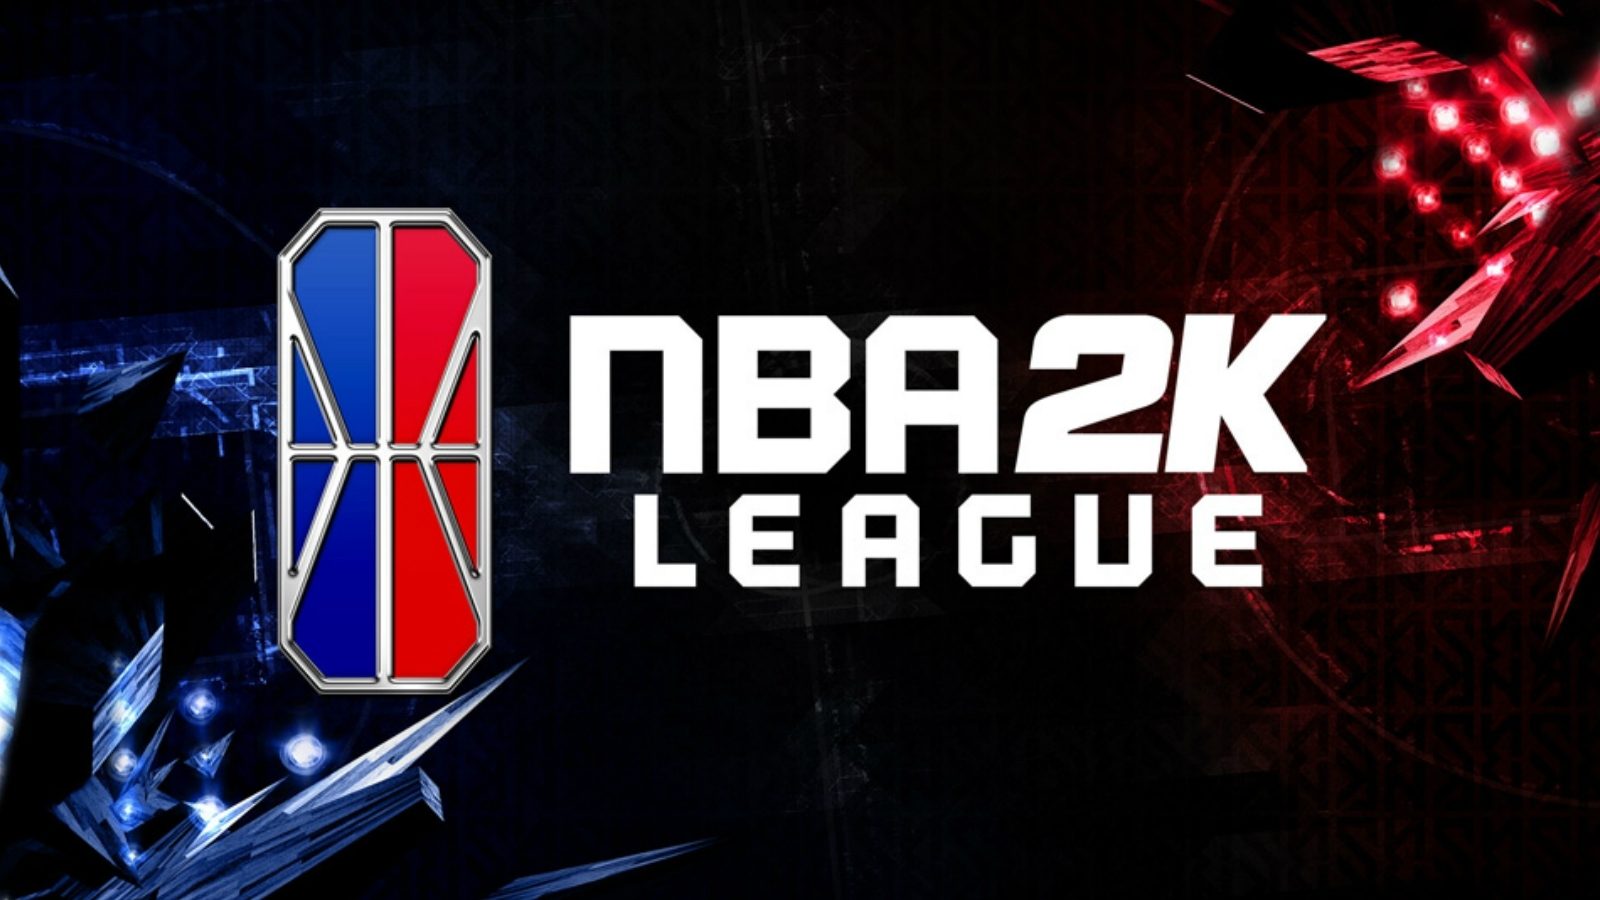 Hawks, Lakers, Wolves franchise’s to join NBA 2K league